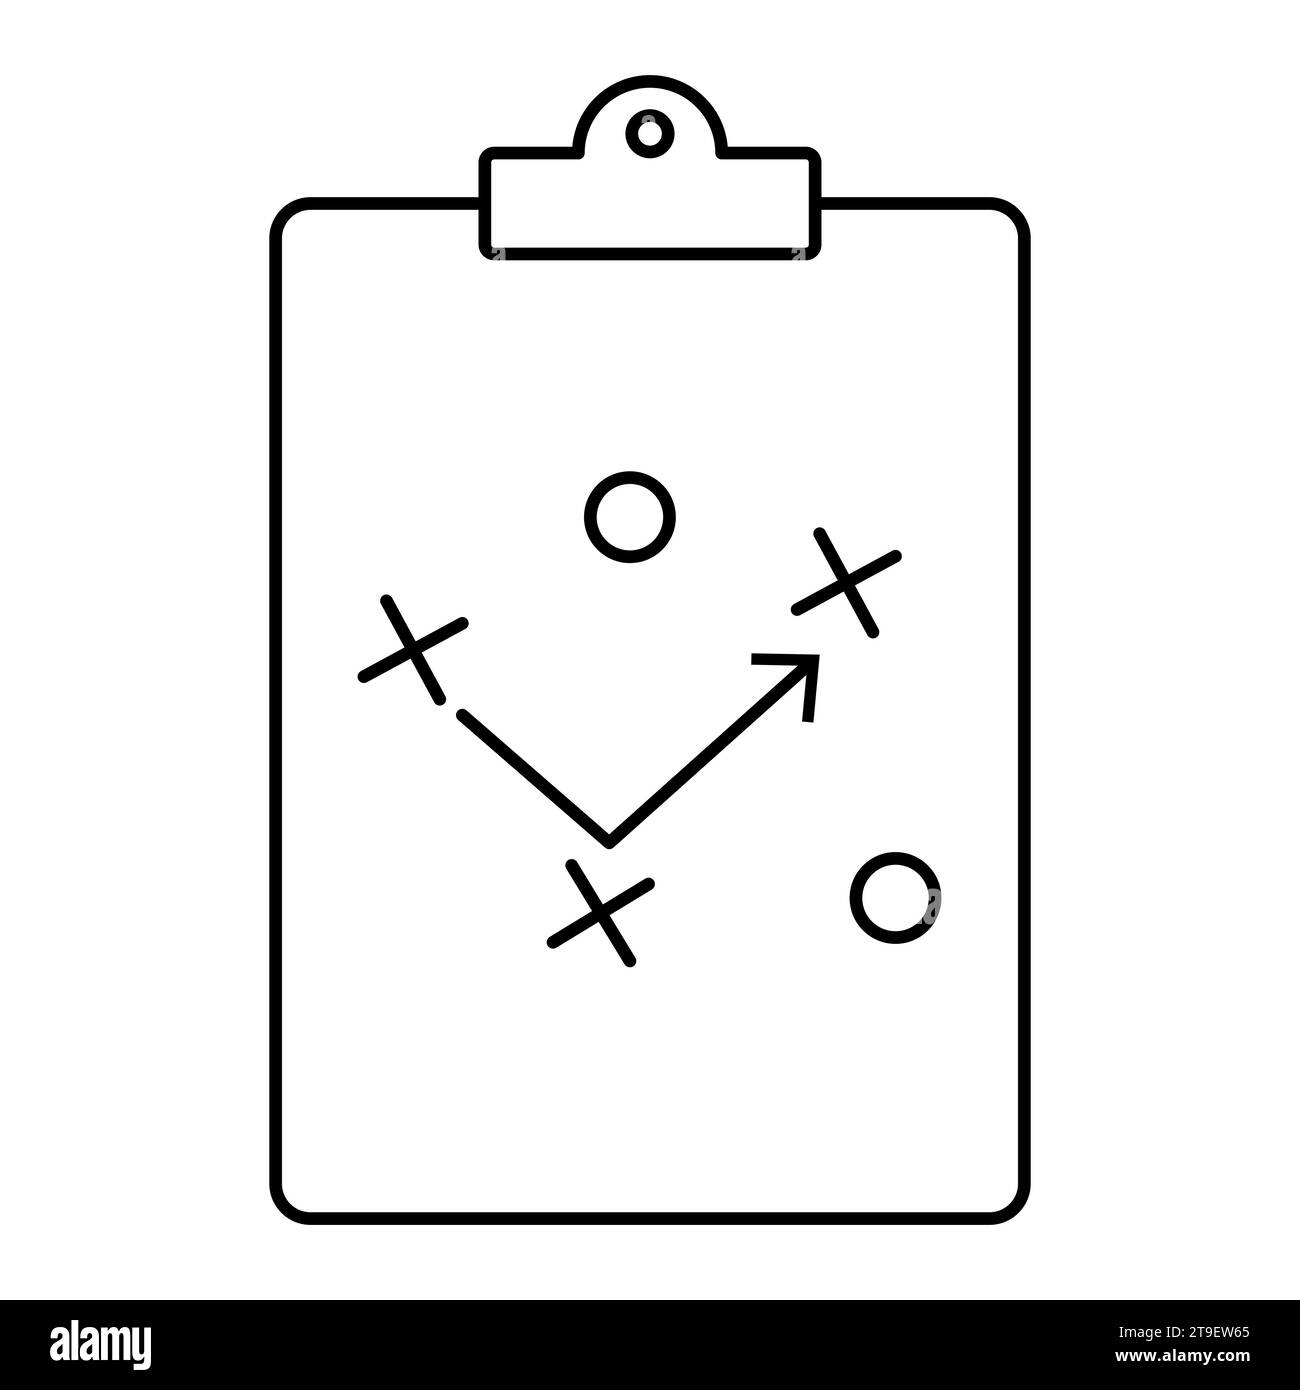 Clipboard game plan icon. Football coach strategy board. Vector illustration isolated on white background Stock Vector